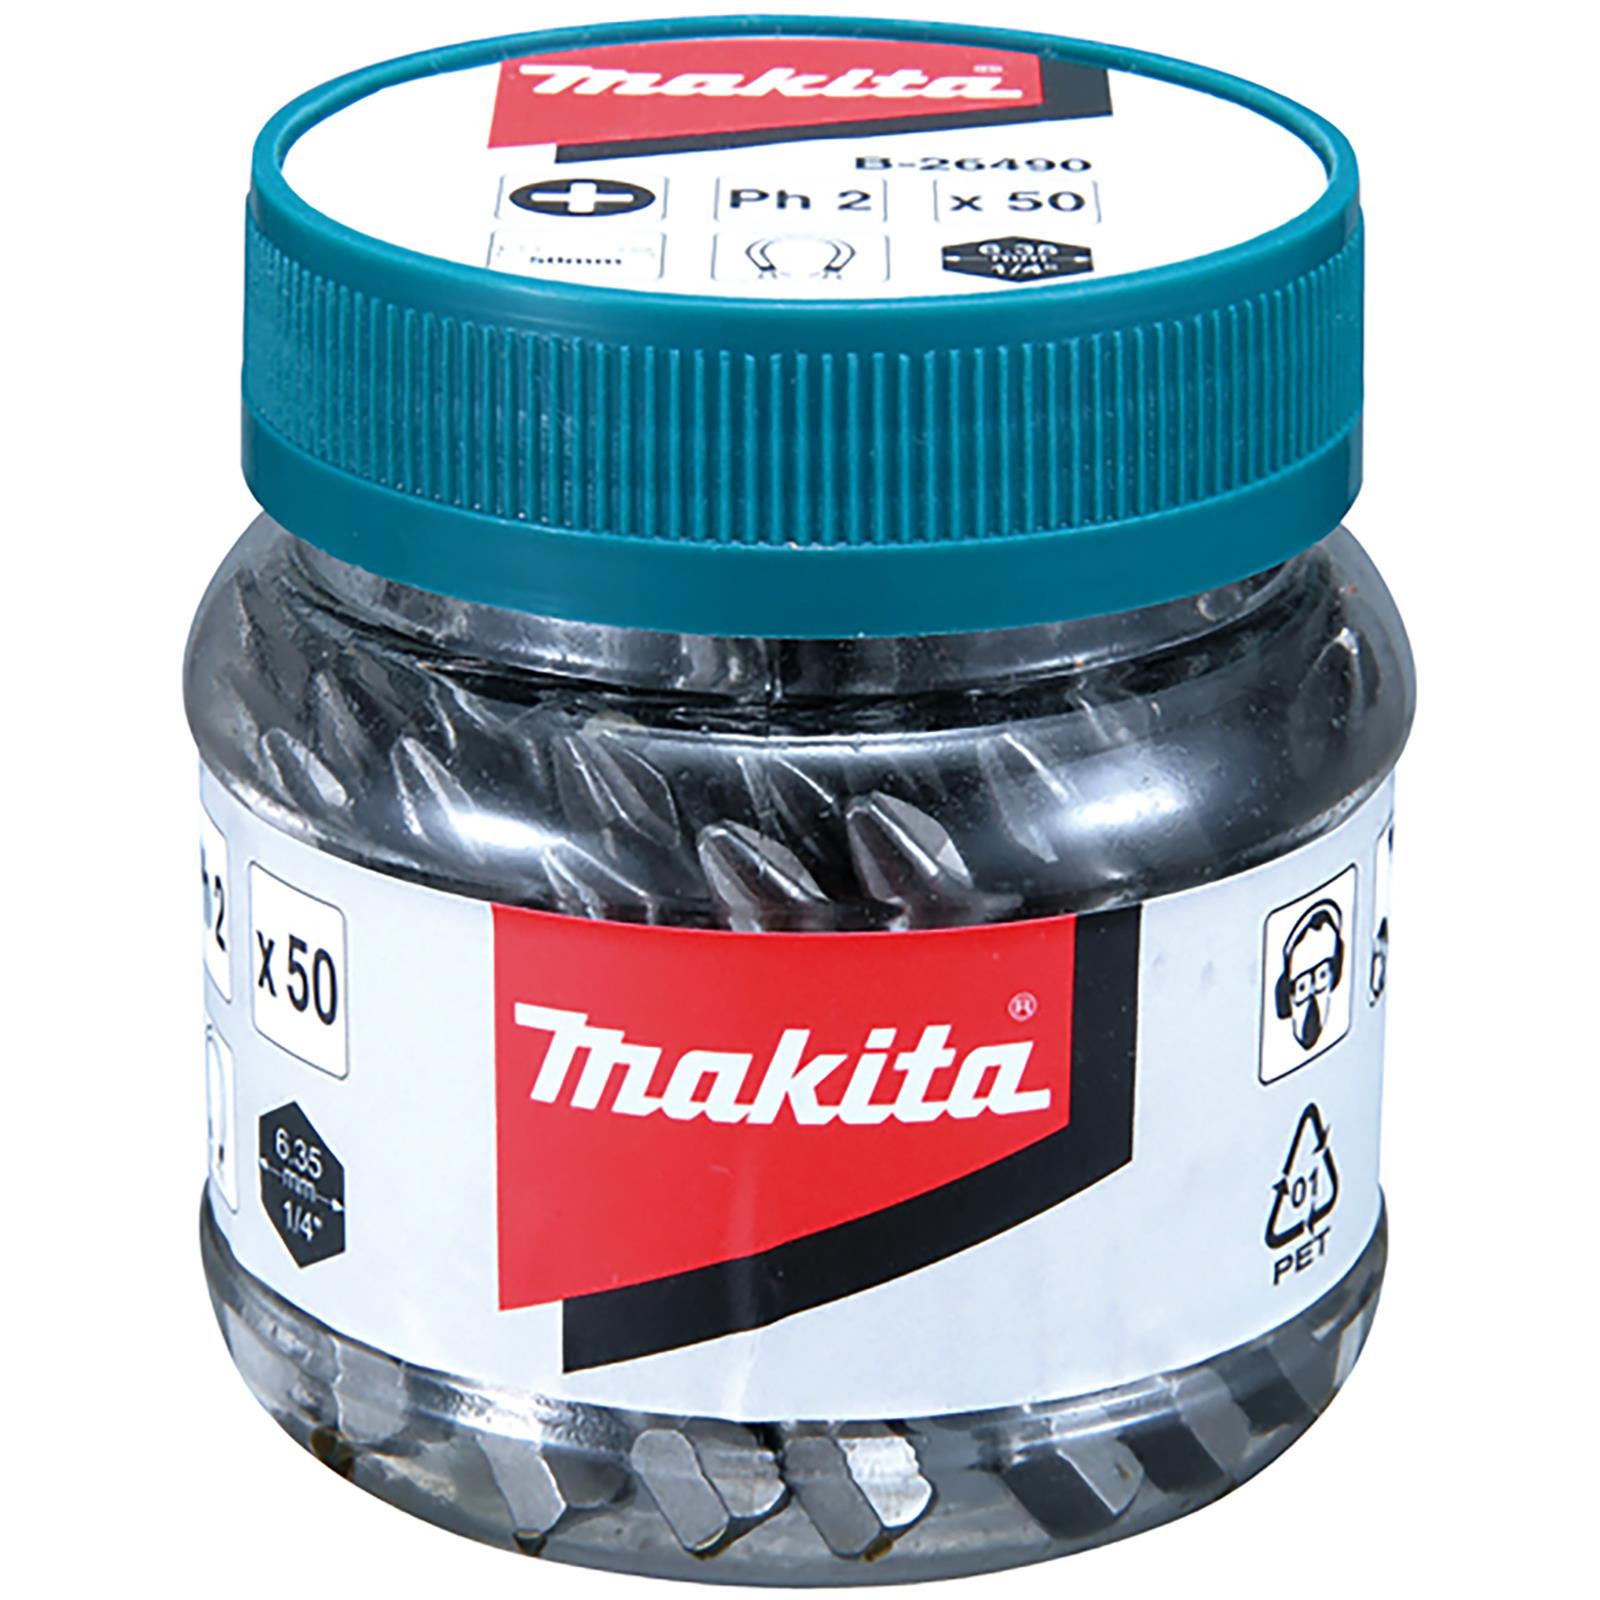 Makita Screwdriver Bits Pozi or Phillips 25mm or 50mm in Candy Jar